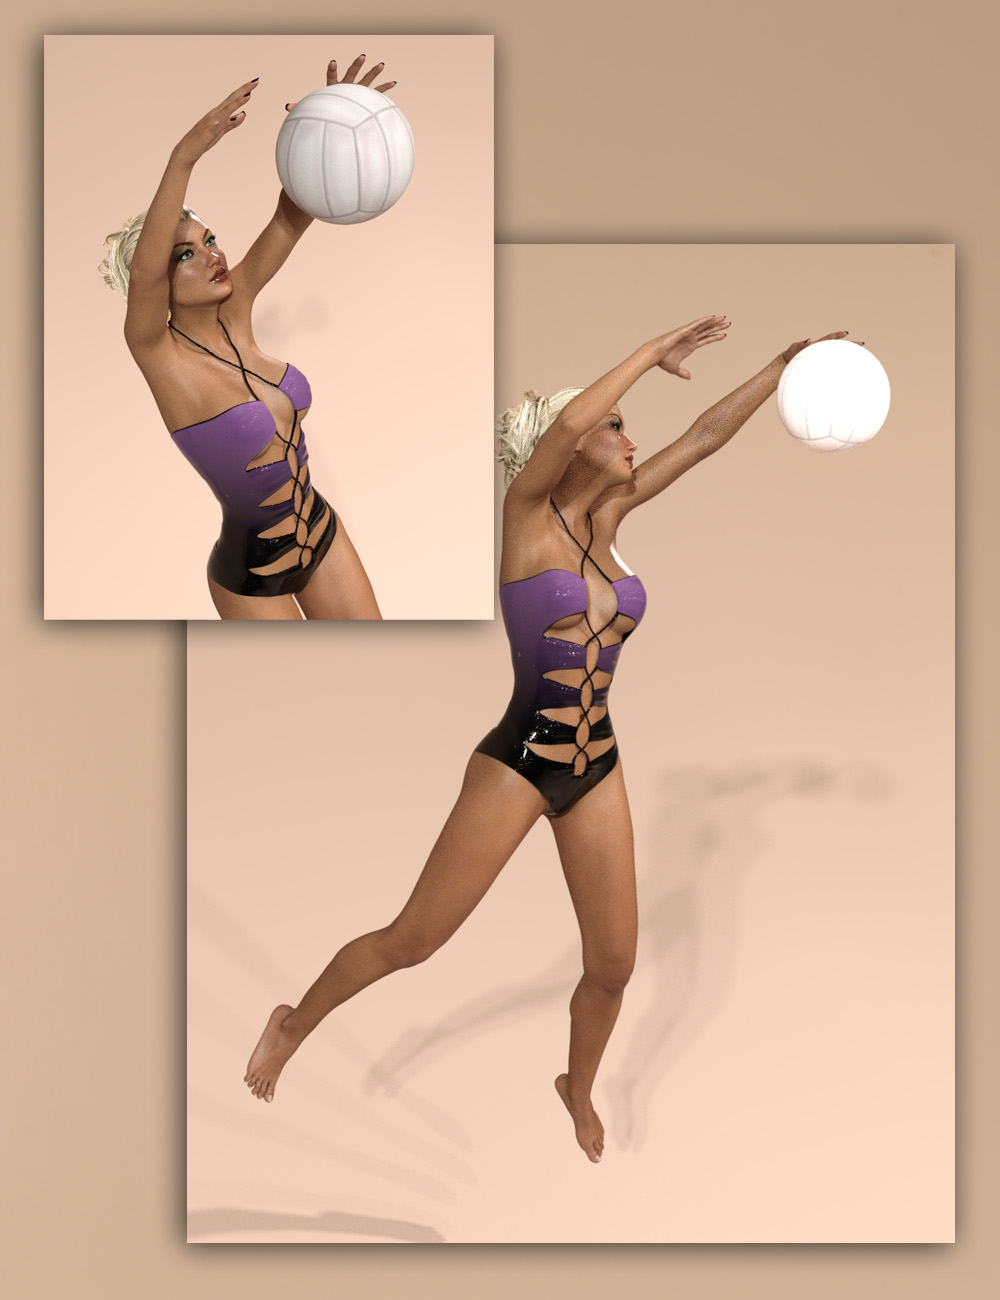 Beach Volleyball Poses for Genesis 3 Female(s) by: RiverSoft Art, 3D Models by Daz 3D